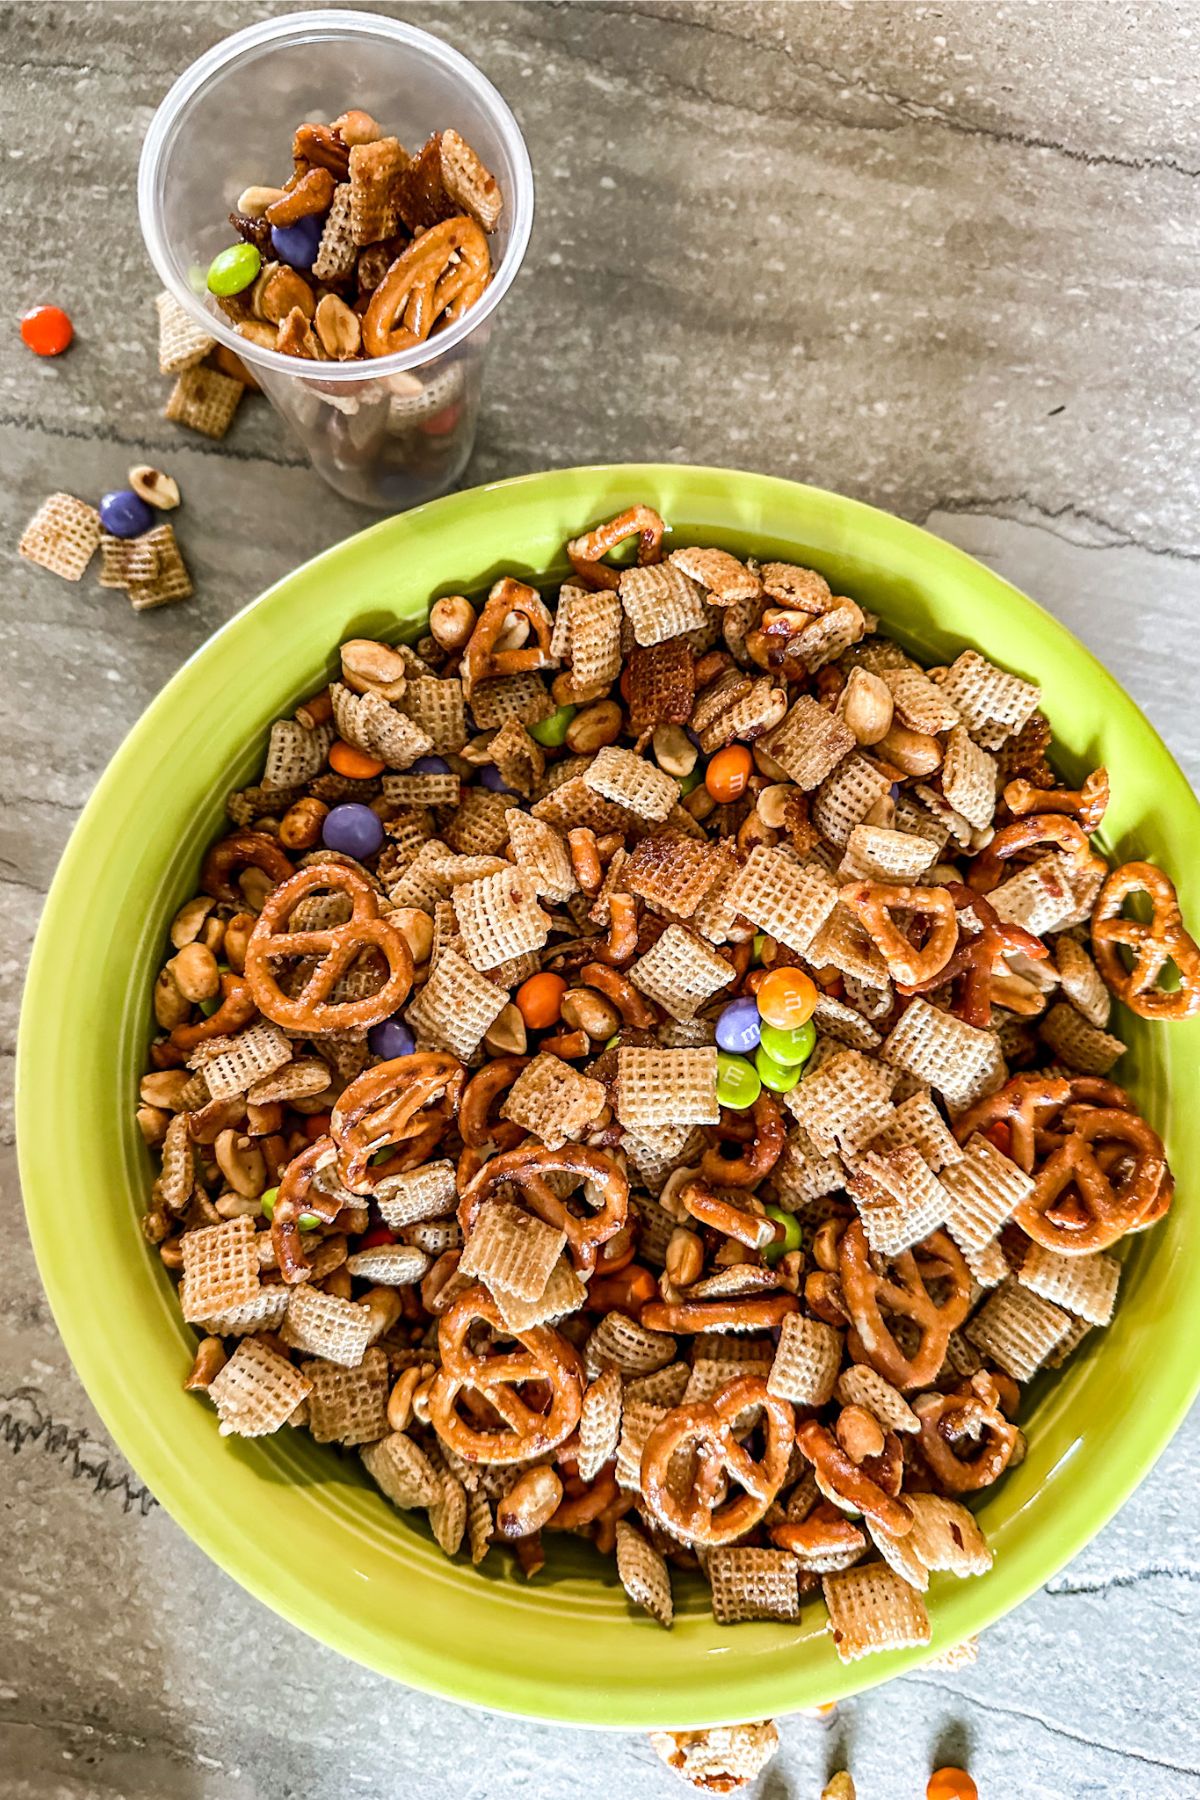 A bowl and small cup full of Snack Mix.